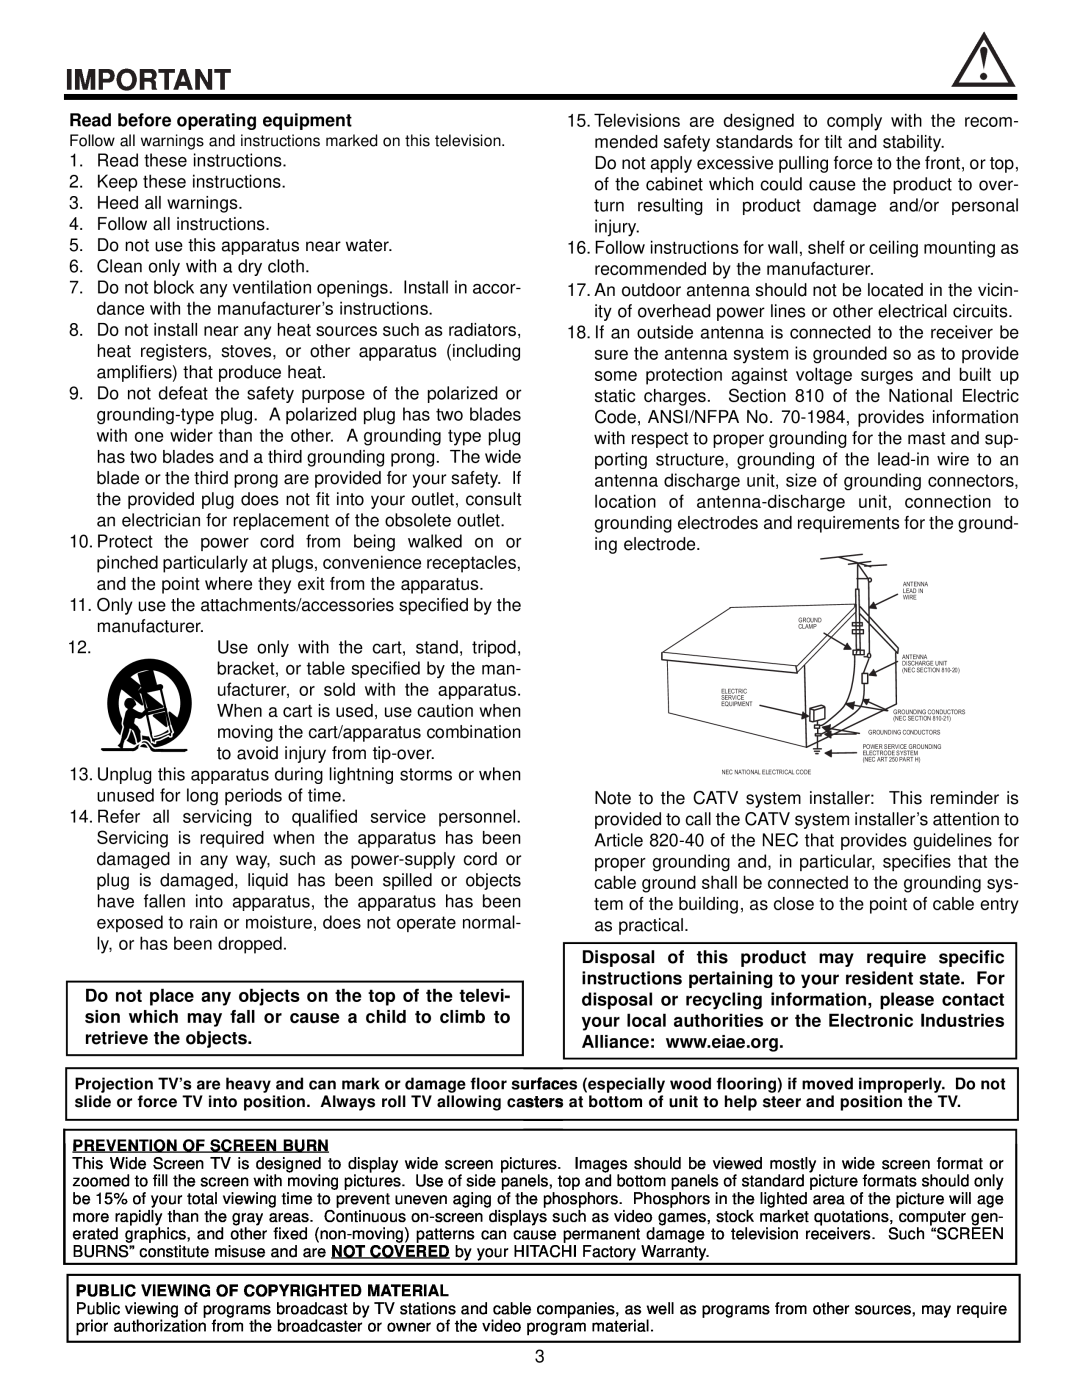 Hitachi 57T500A important safety instructions Read before operating equipment 